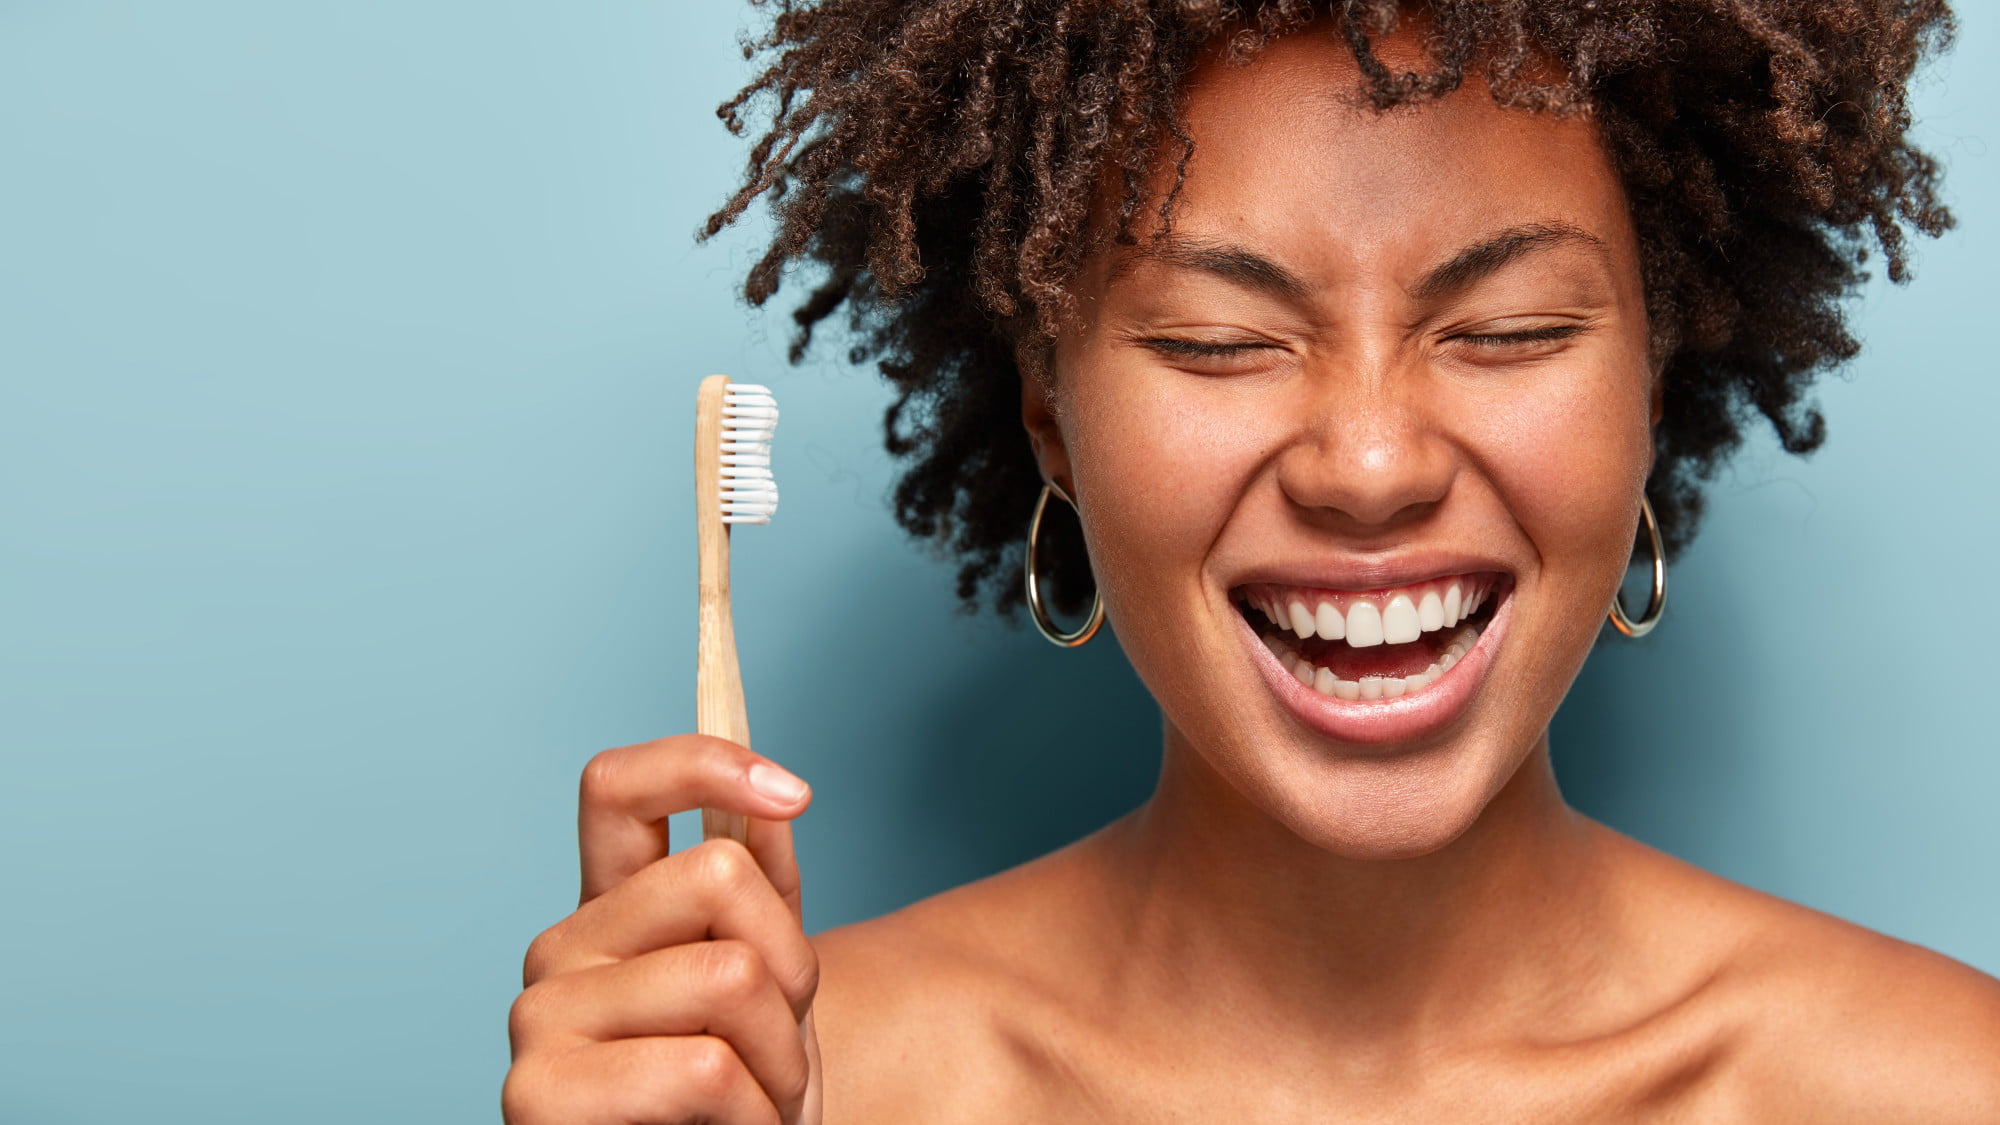 If you want to have a great smile, there are several things you should do. Here are our greatest tips for healthy teeth and gums.